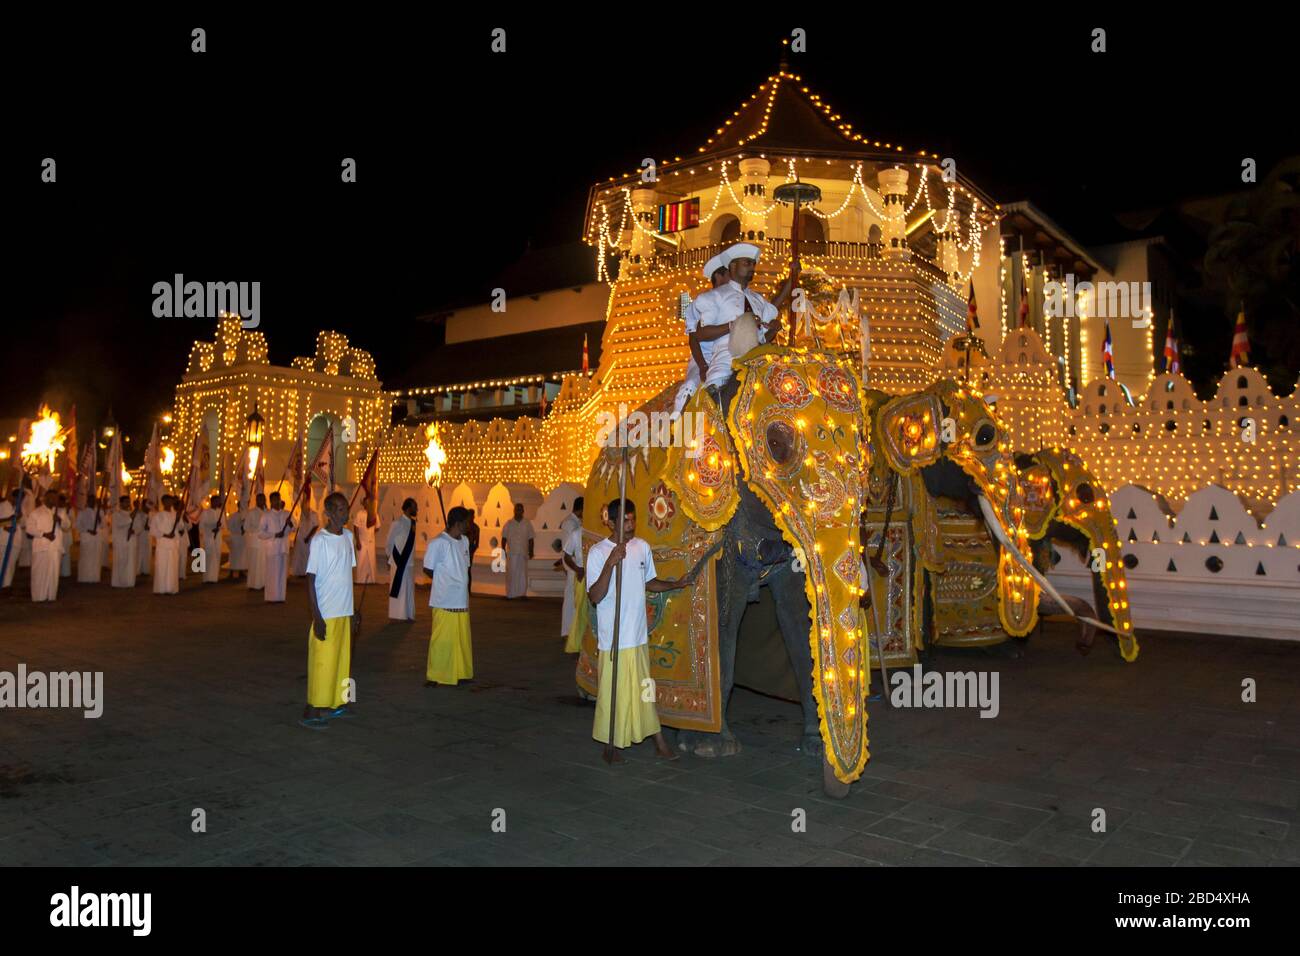 Ceremonial elephants parade past the Temple of the Sacred Tooth Relic at Kandy in Sri Lanka during the Buddhist Esala Perahera (great procession). Stock Photo